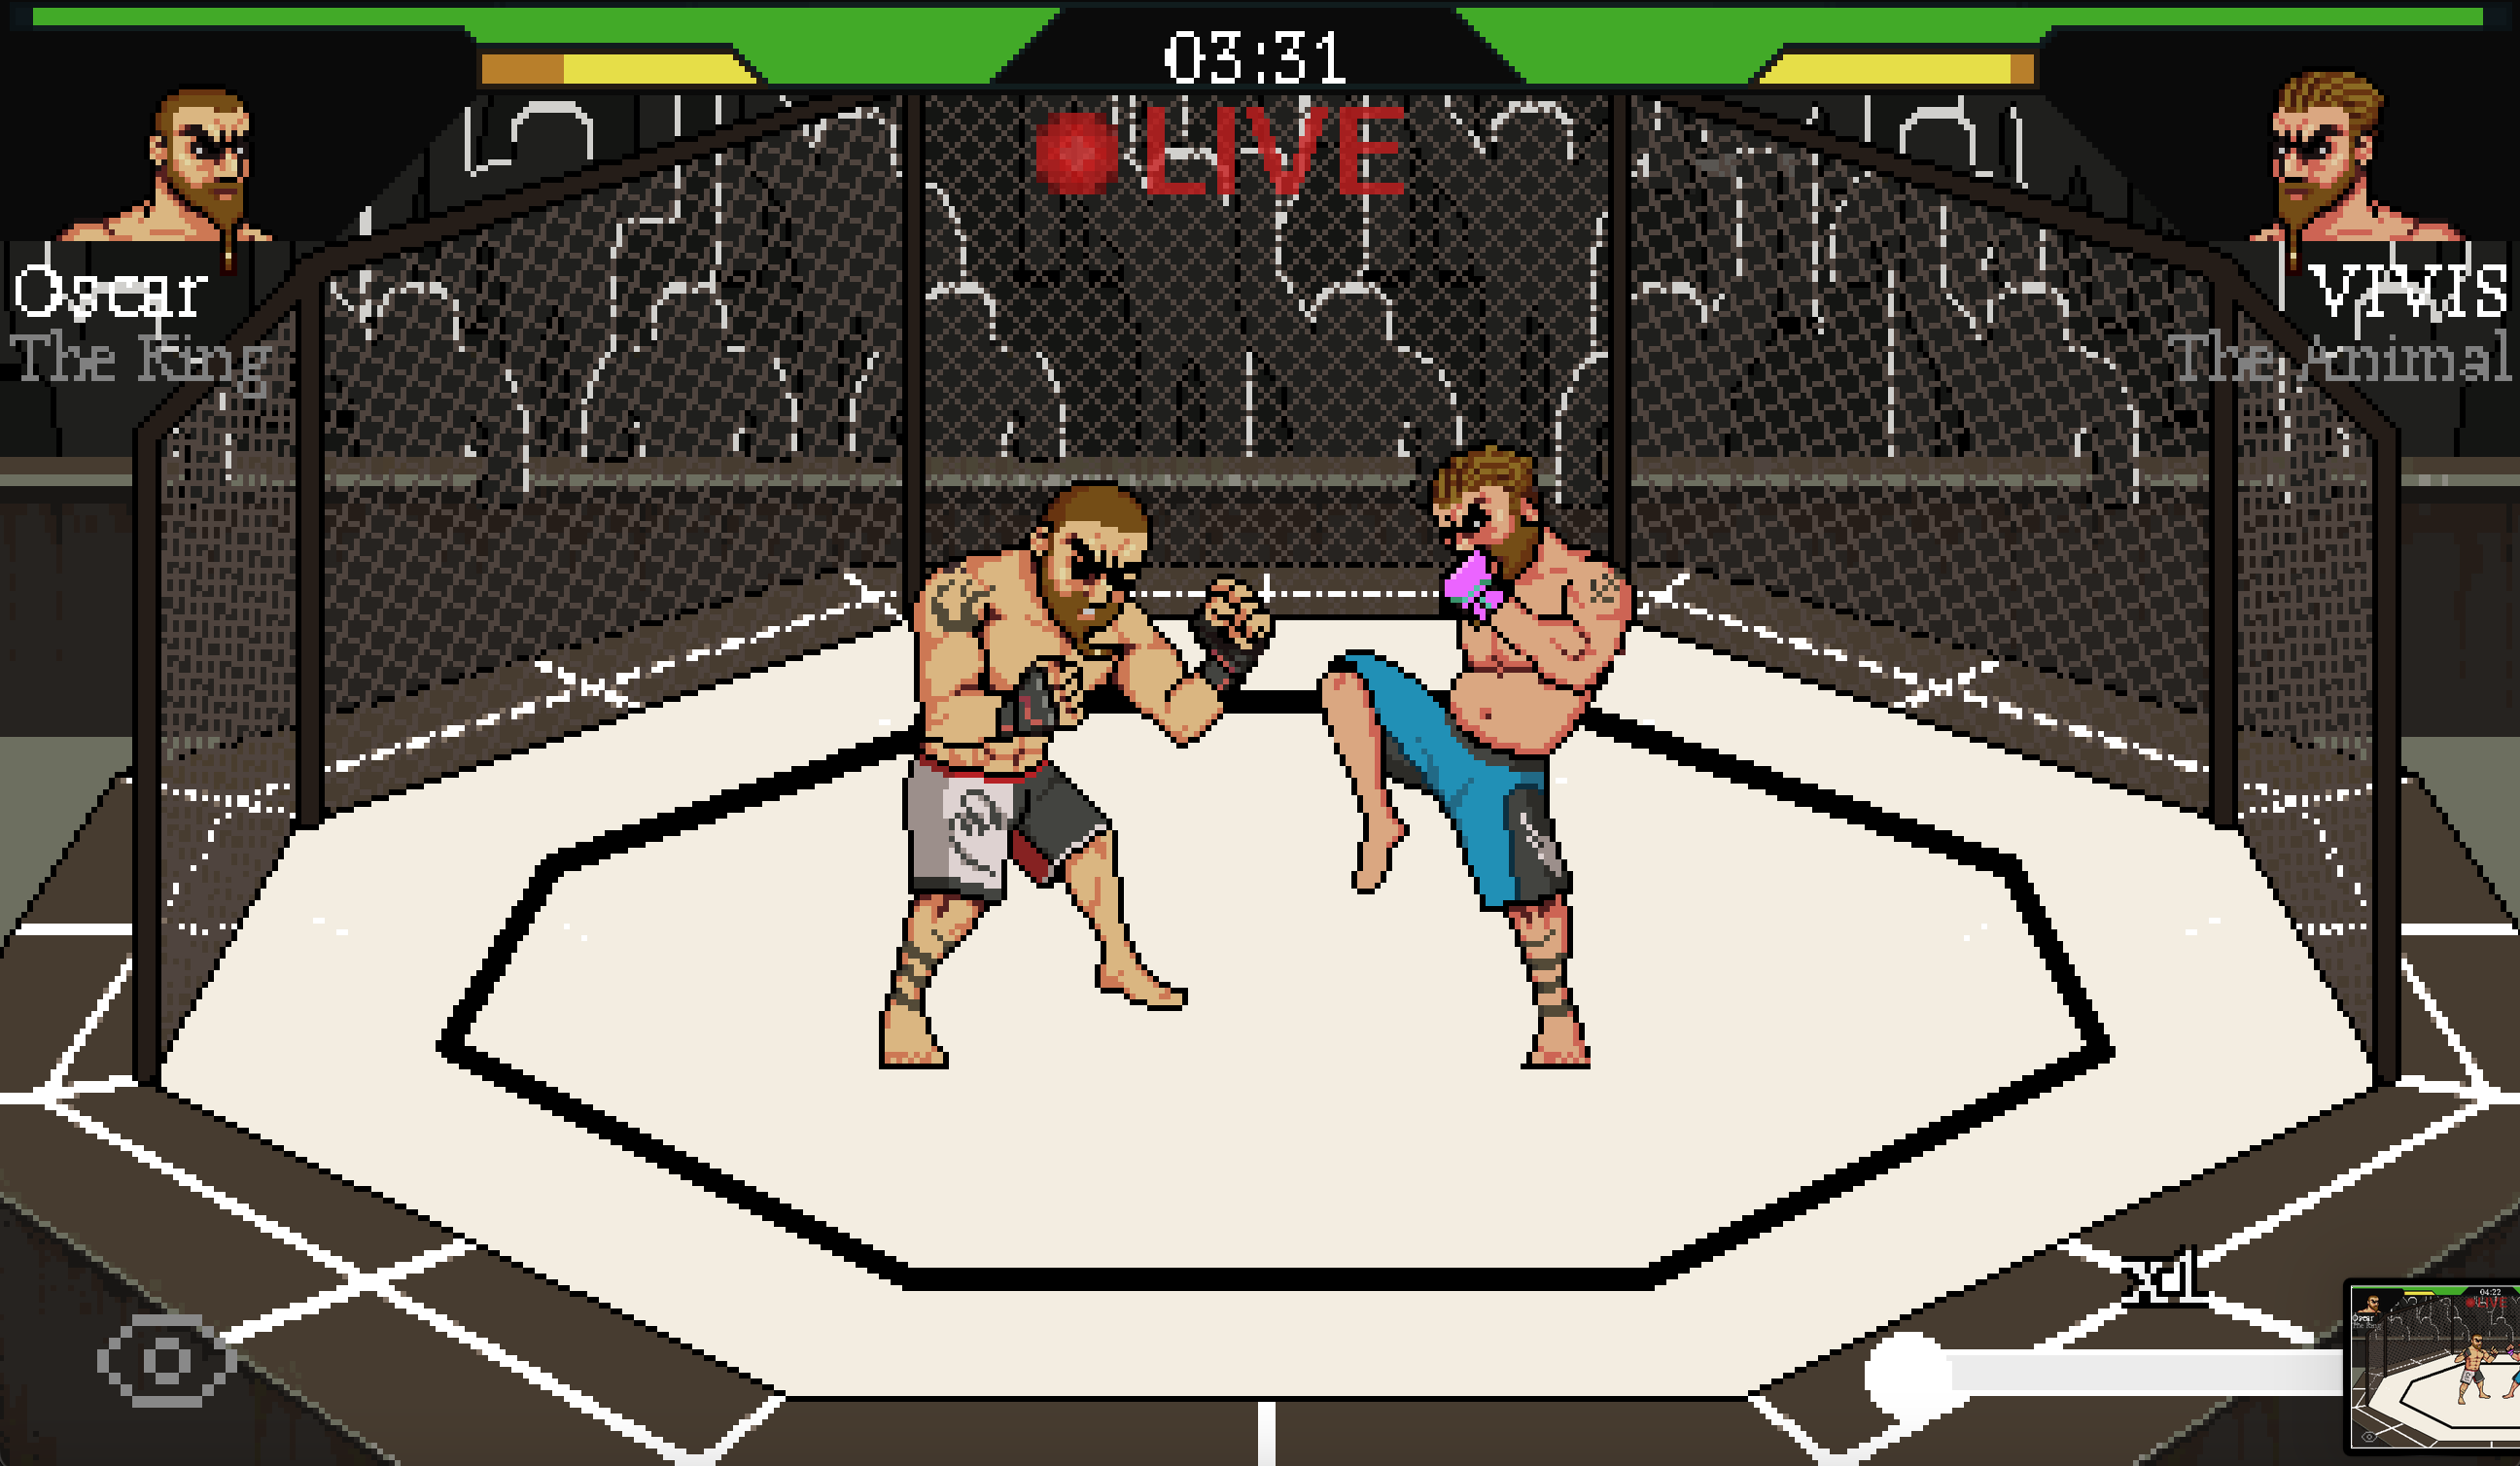 Wrestle Bros::Appstore for Android